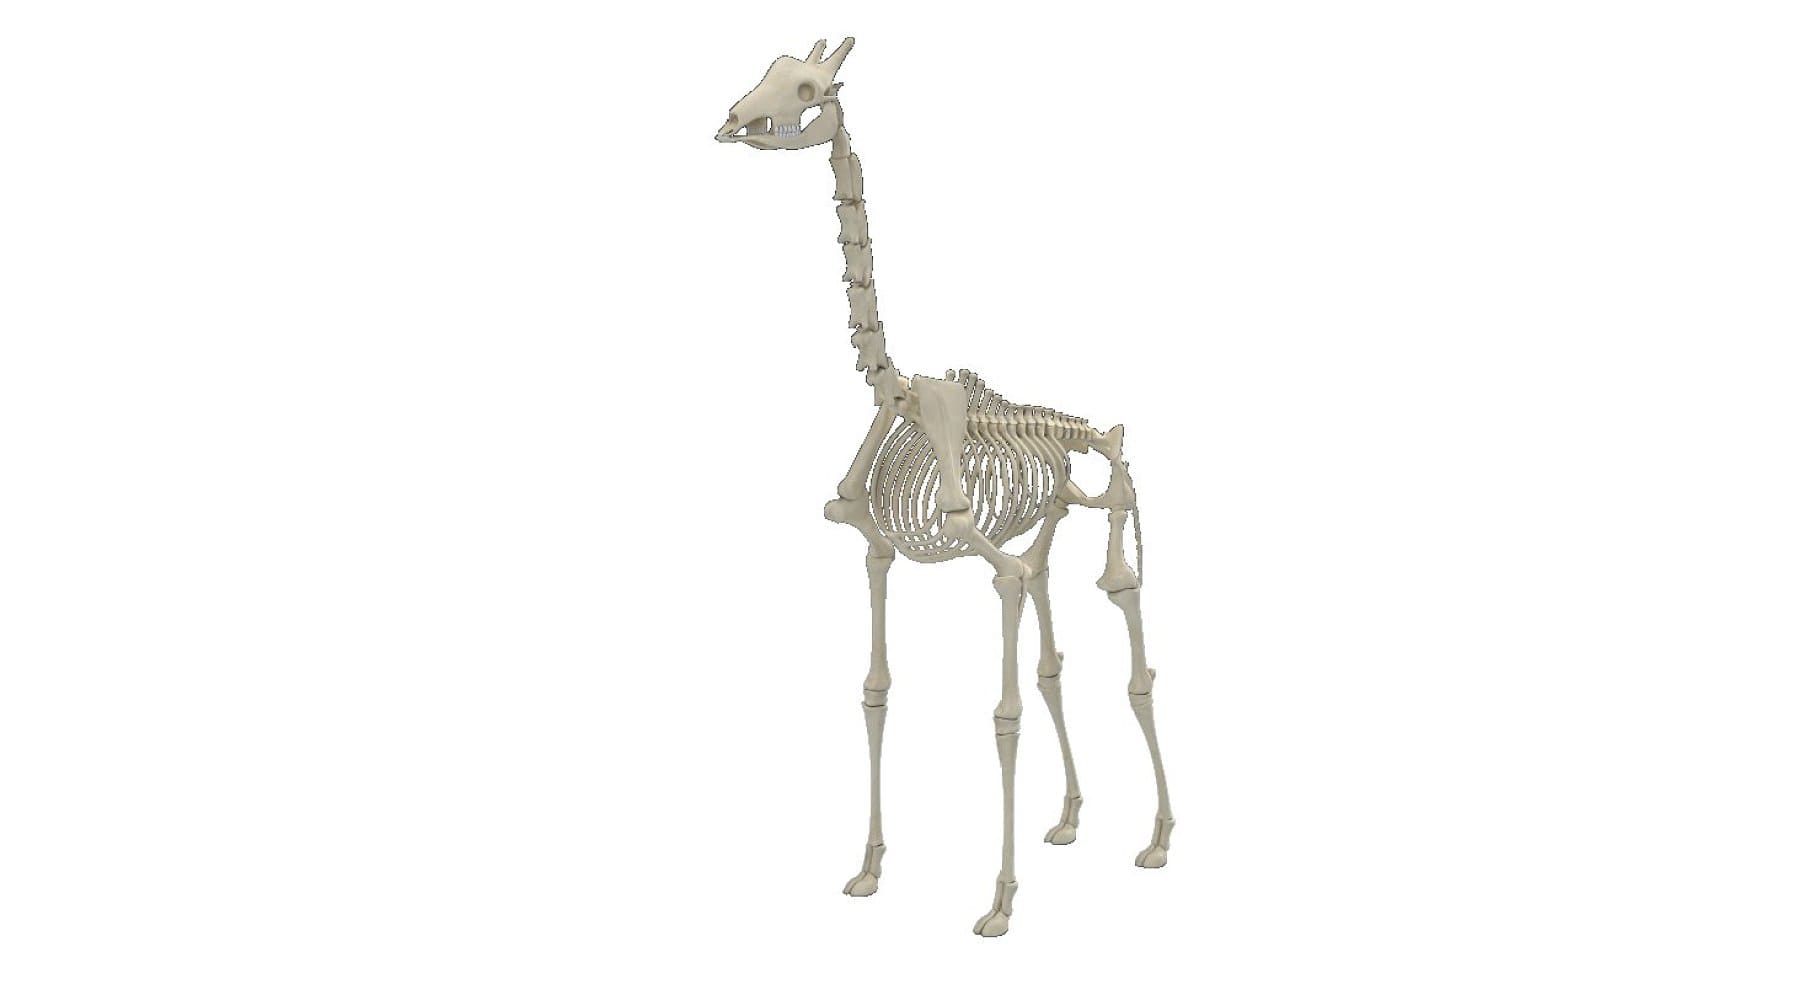 Front view of a giraffe skeleton.